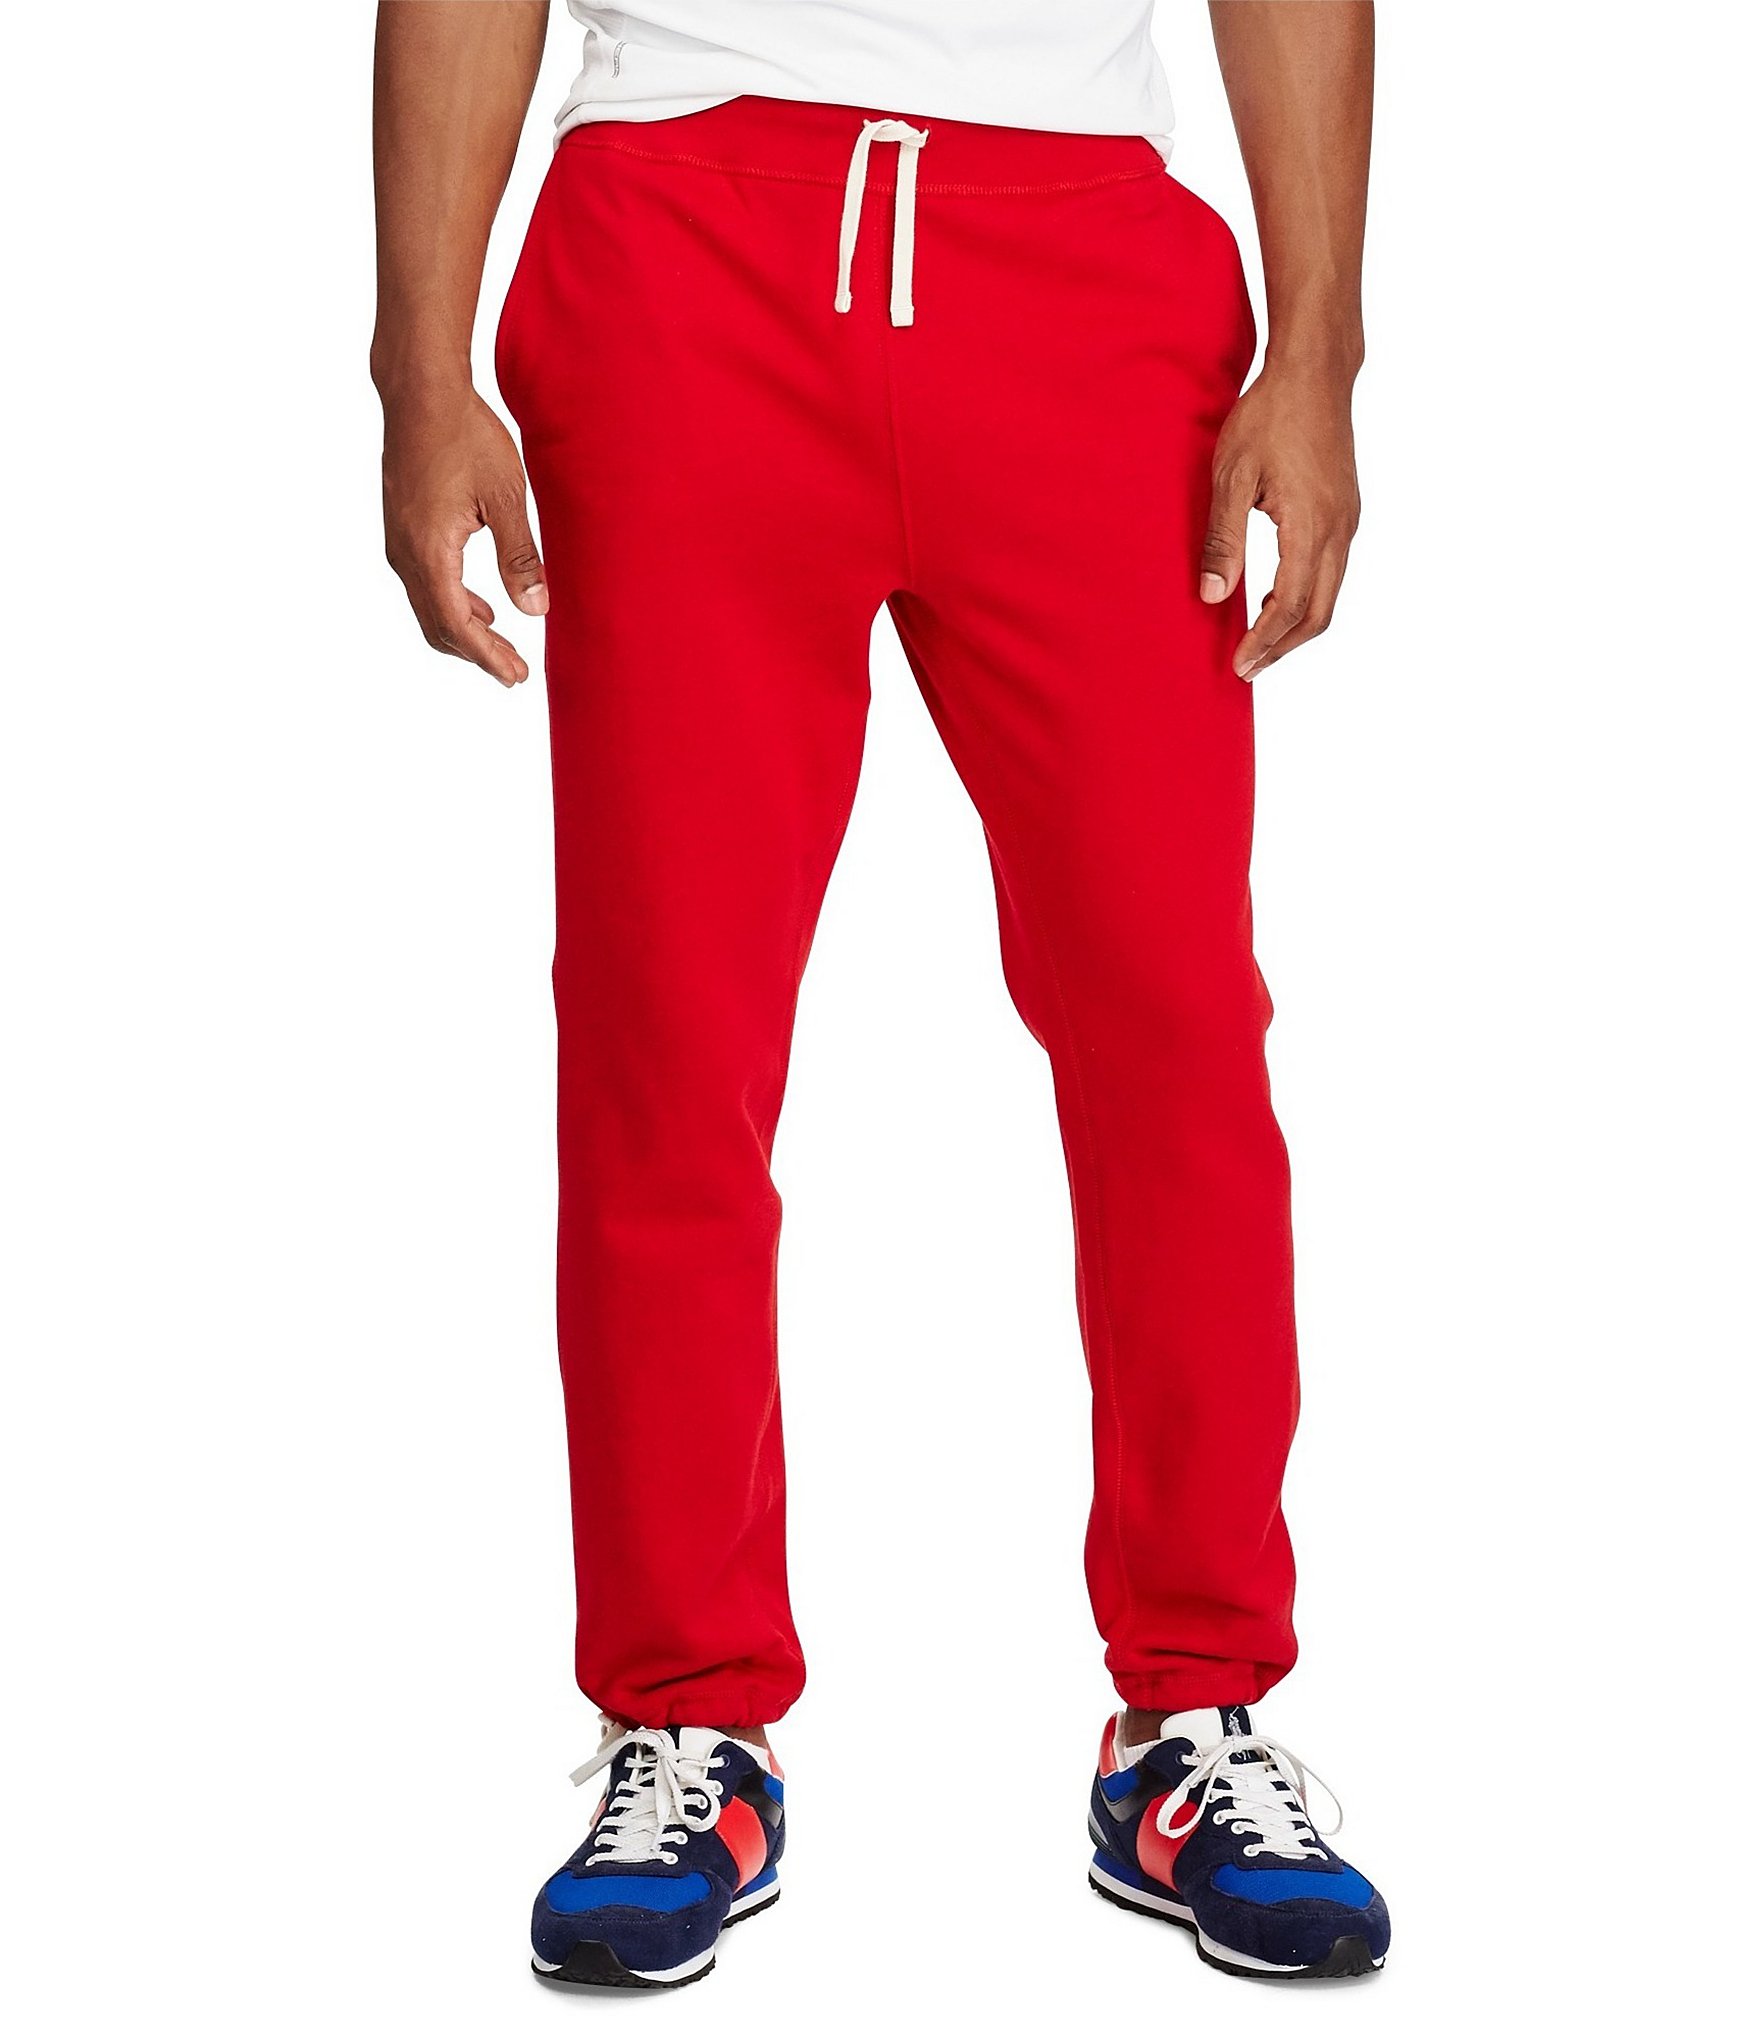 polo pants red